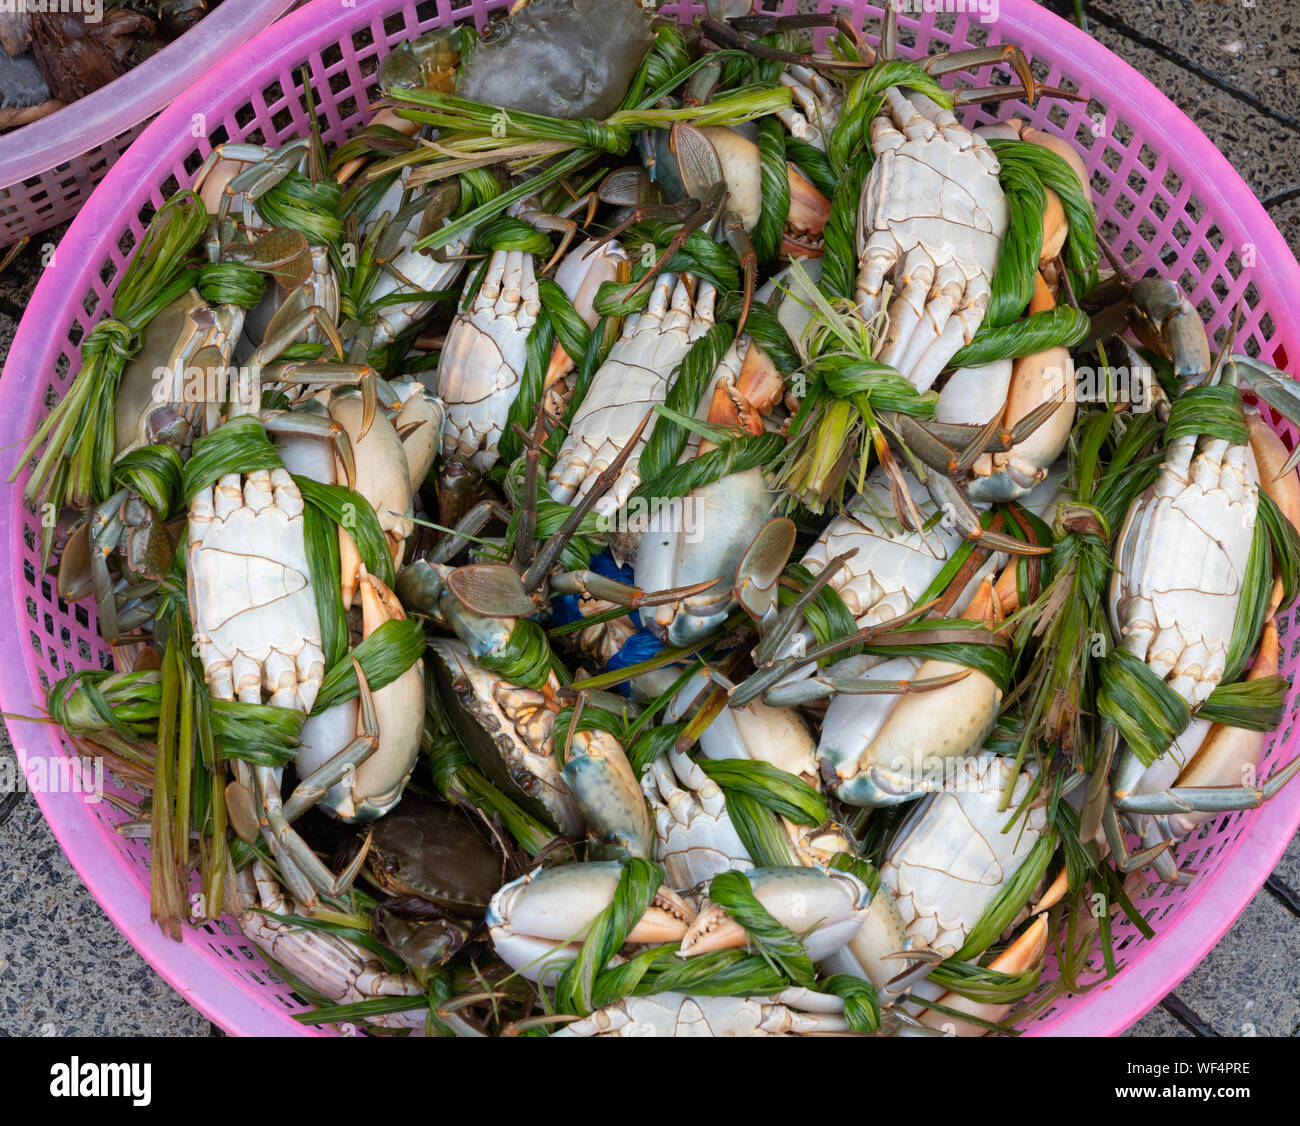 Pink plastic basket containing soft shell crabs for sale in an outdoor  market in Hoi An Vietnam Stock Photo - Alamy